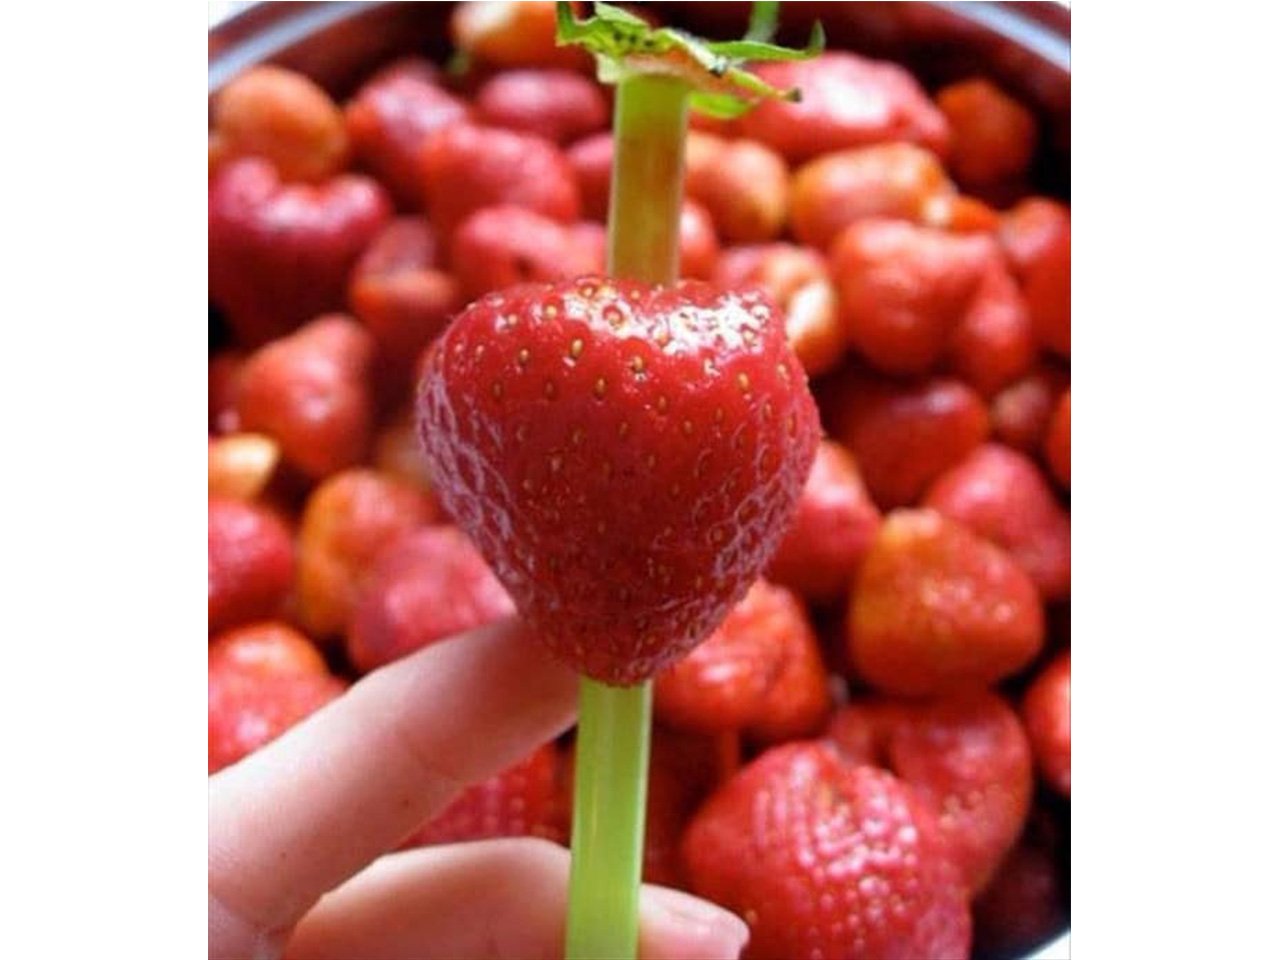 Strawberry with a straw through it to pop the stem off